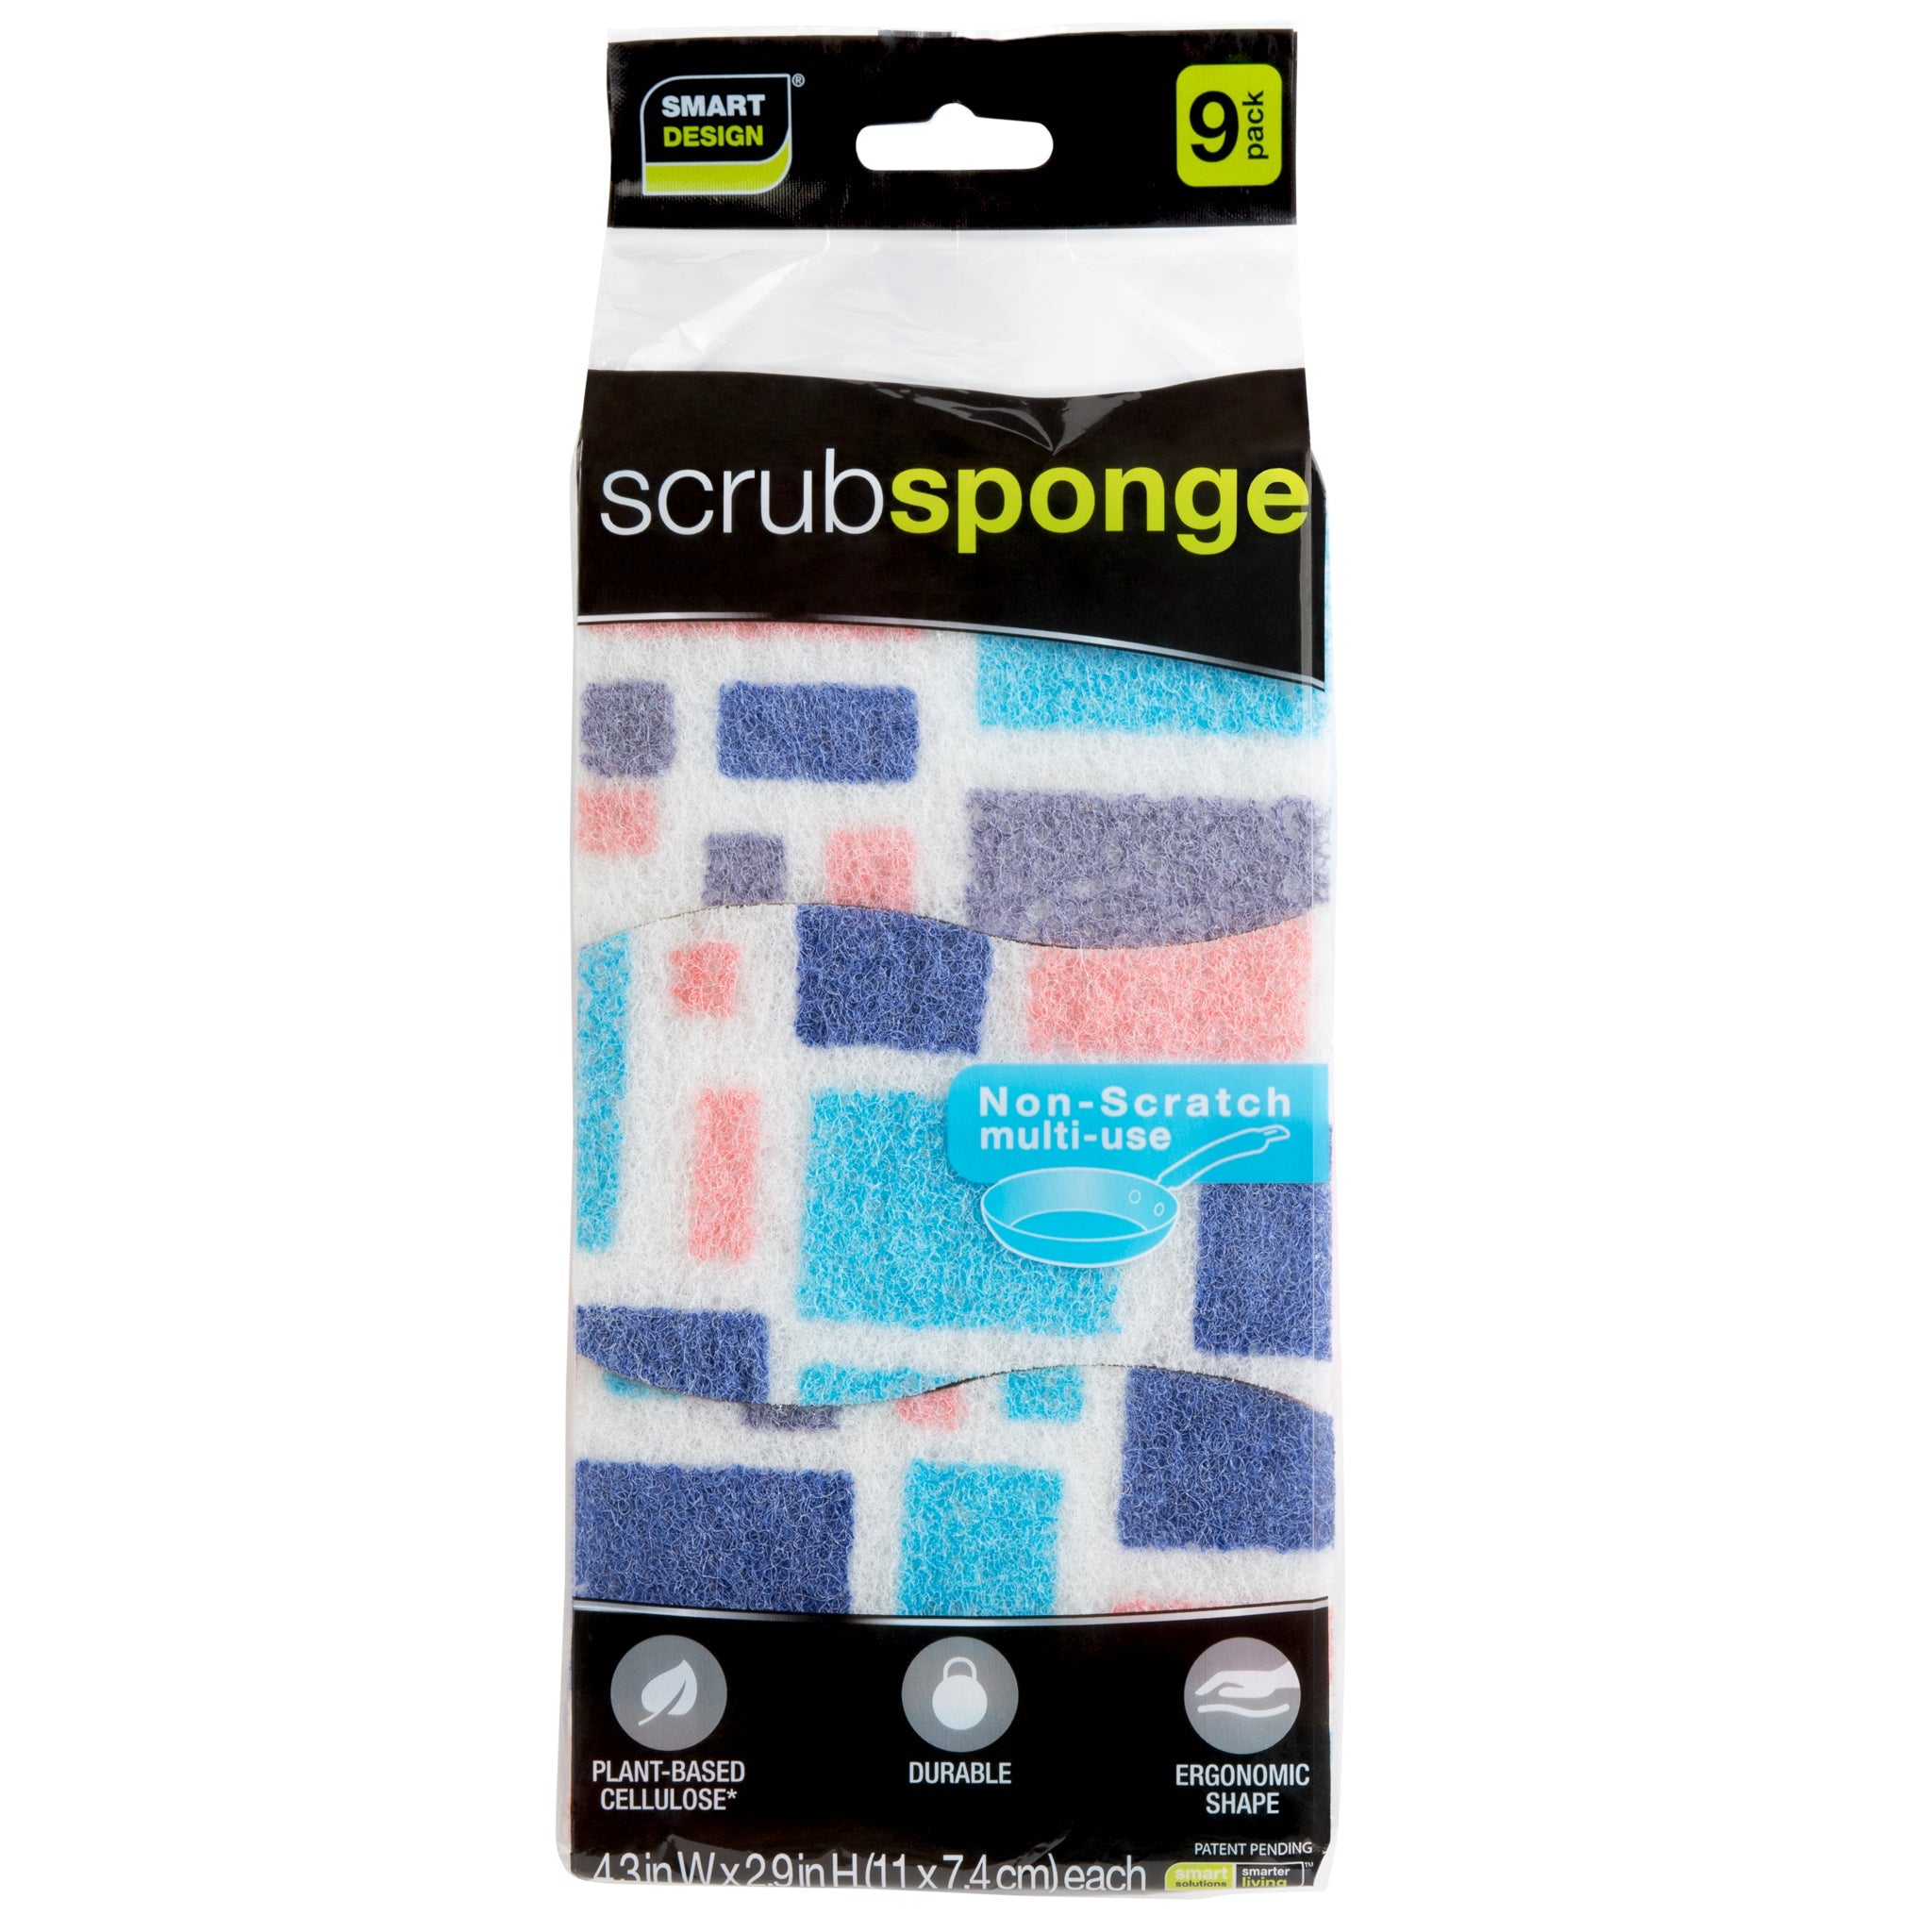 Non-Scratch Cellulose Smart Scrub Sponge Ultra Absorbent Ergonomic Shape Cleaning, Dishes, & Hard Stains - Smart Design 20